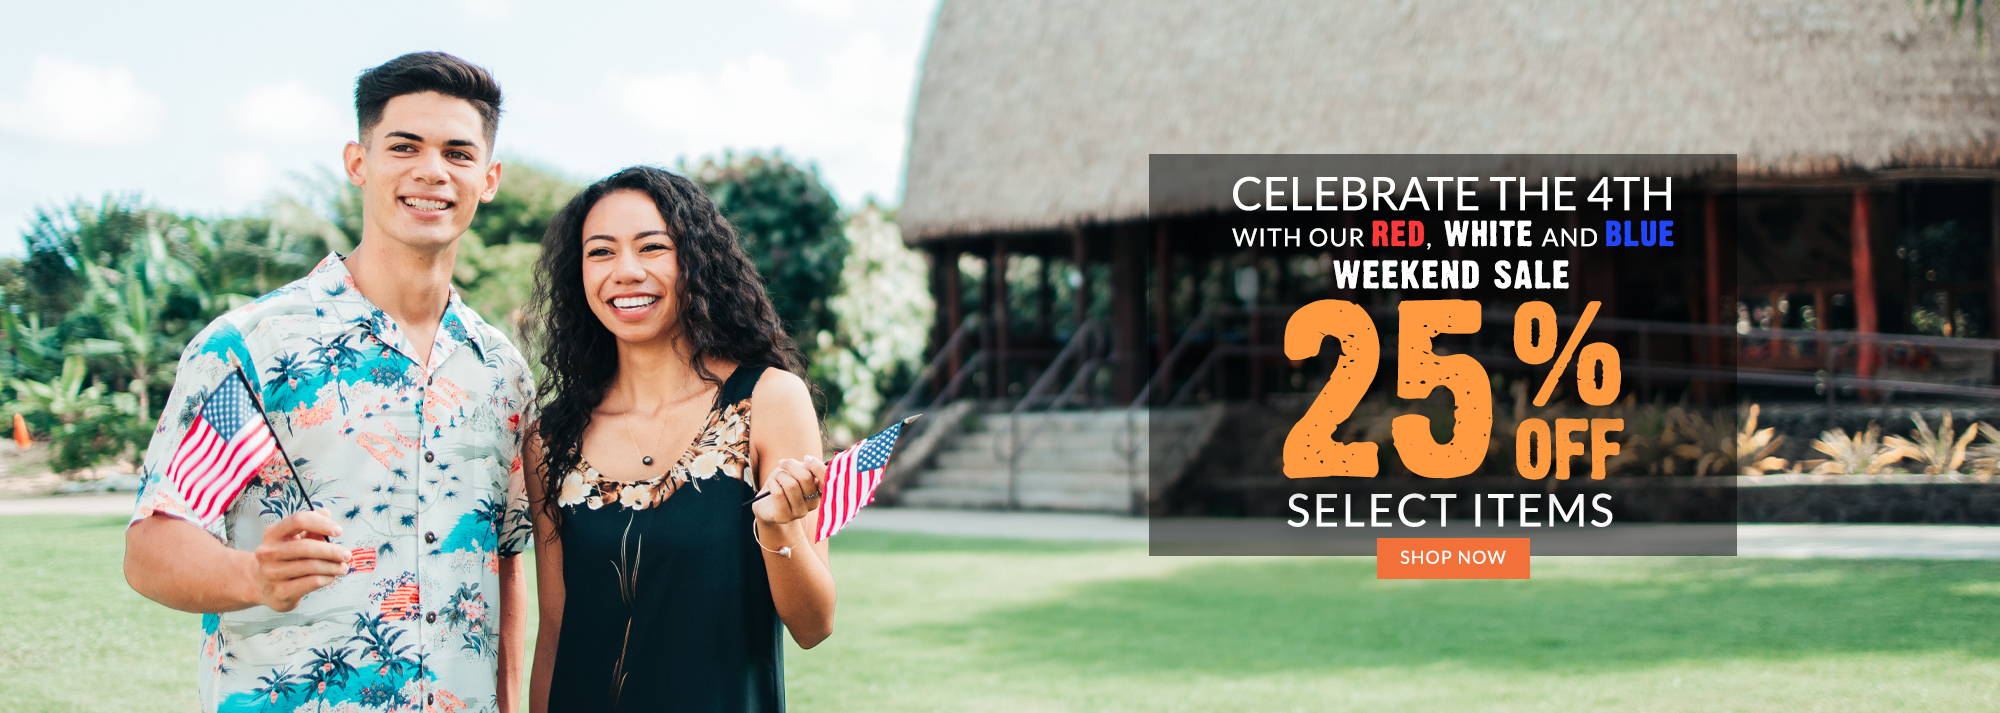 Celebrate 246 years of Red, White and Blue 25% off select products